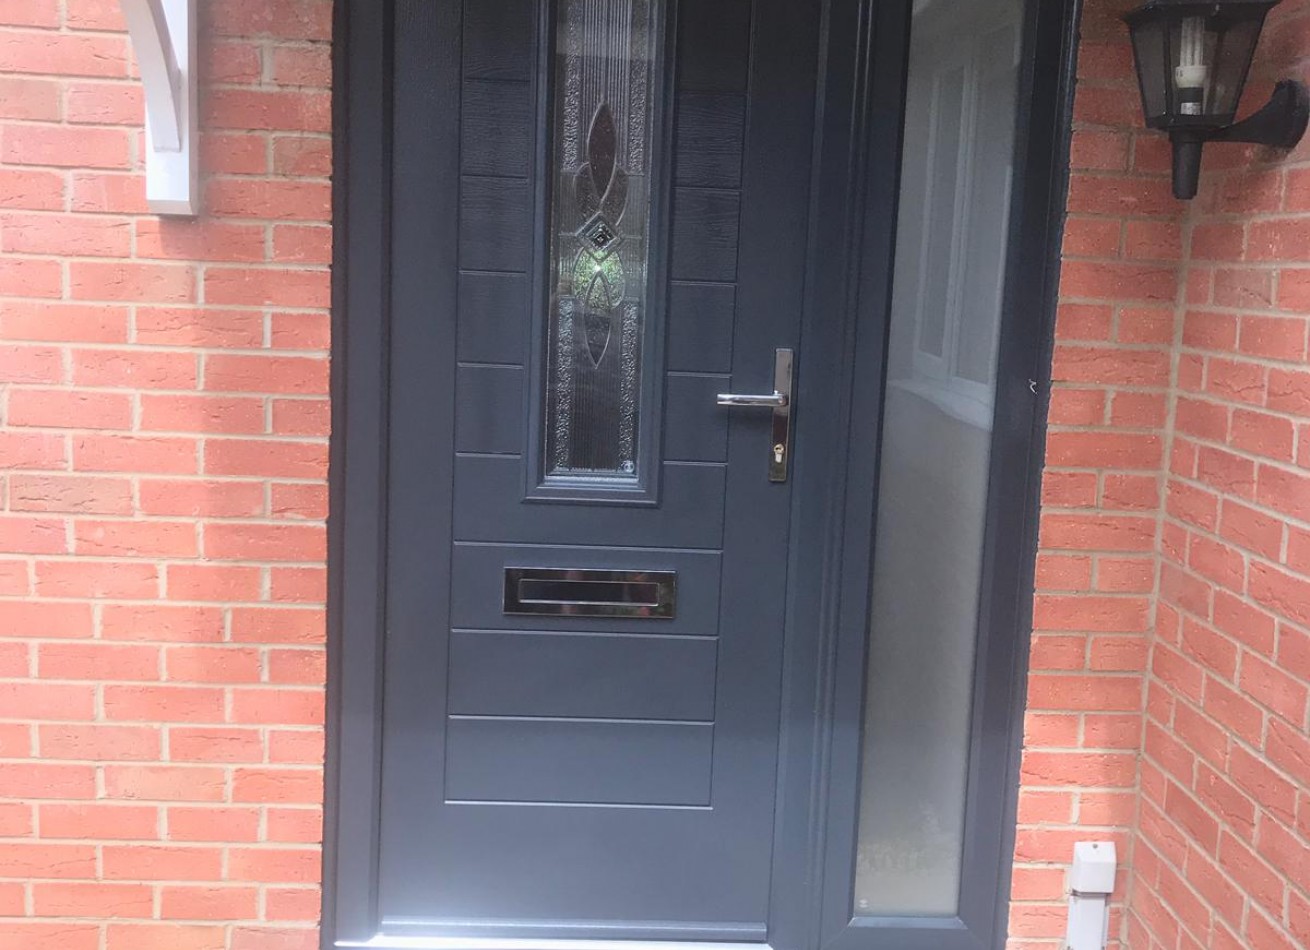 Anthracite grey door and frame